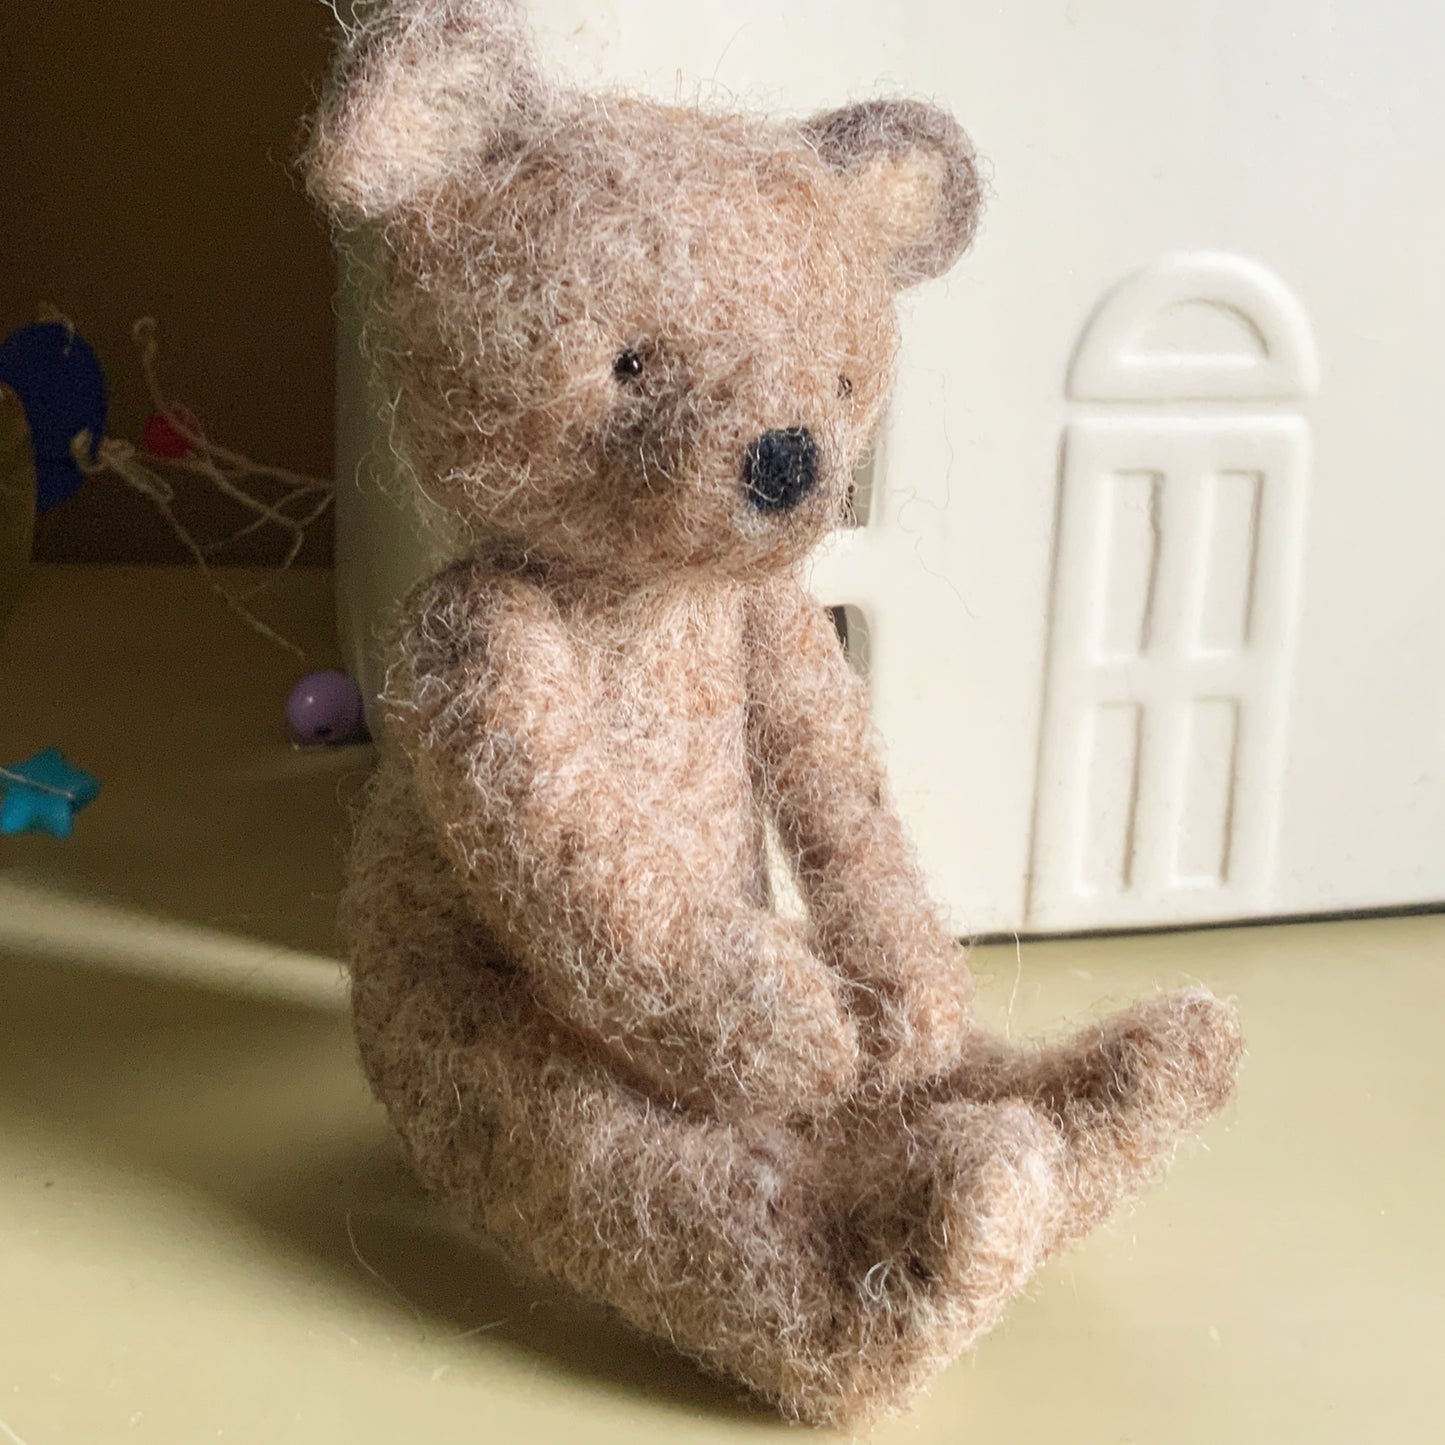 Needle Felted Articulated Teddy Bear | Sunday 26th May | 11am to 3pm